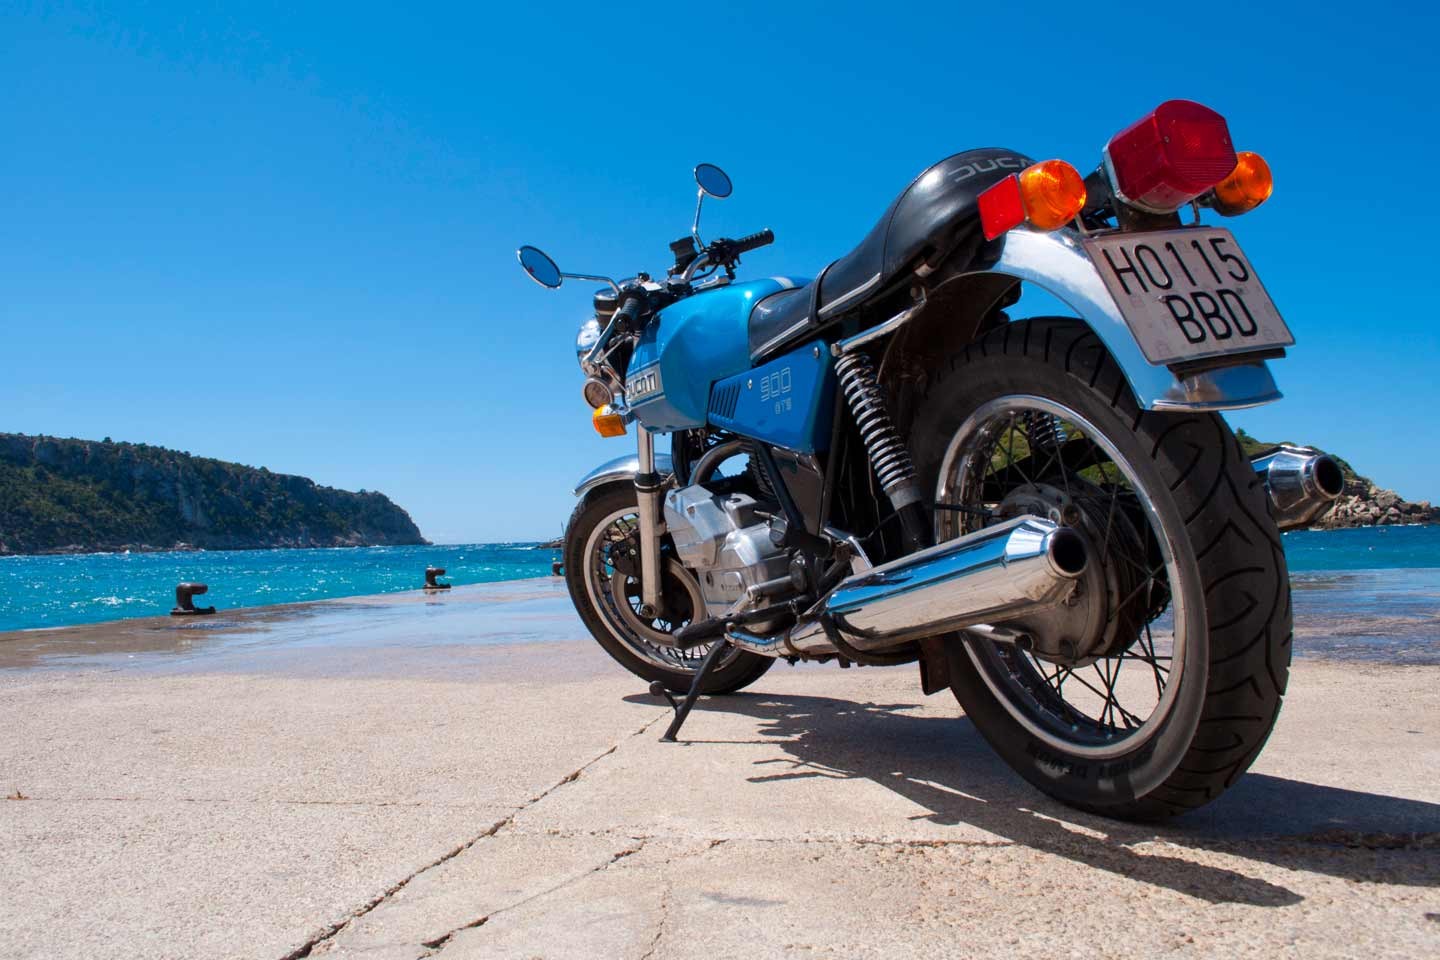 Motorbike Hire Motorbike Hire In Holiday Activities In Mallorca